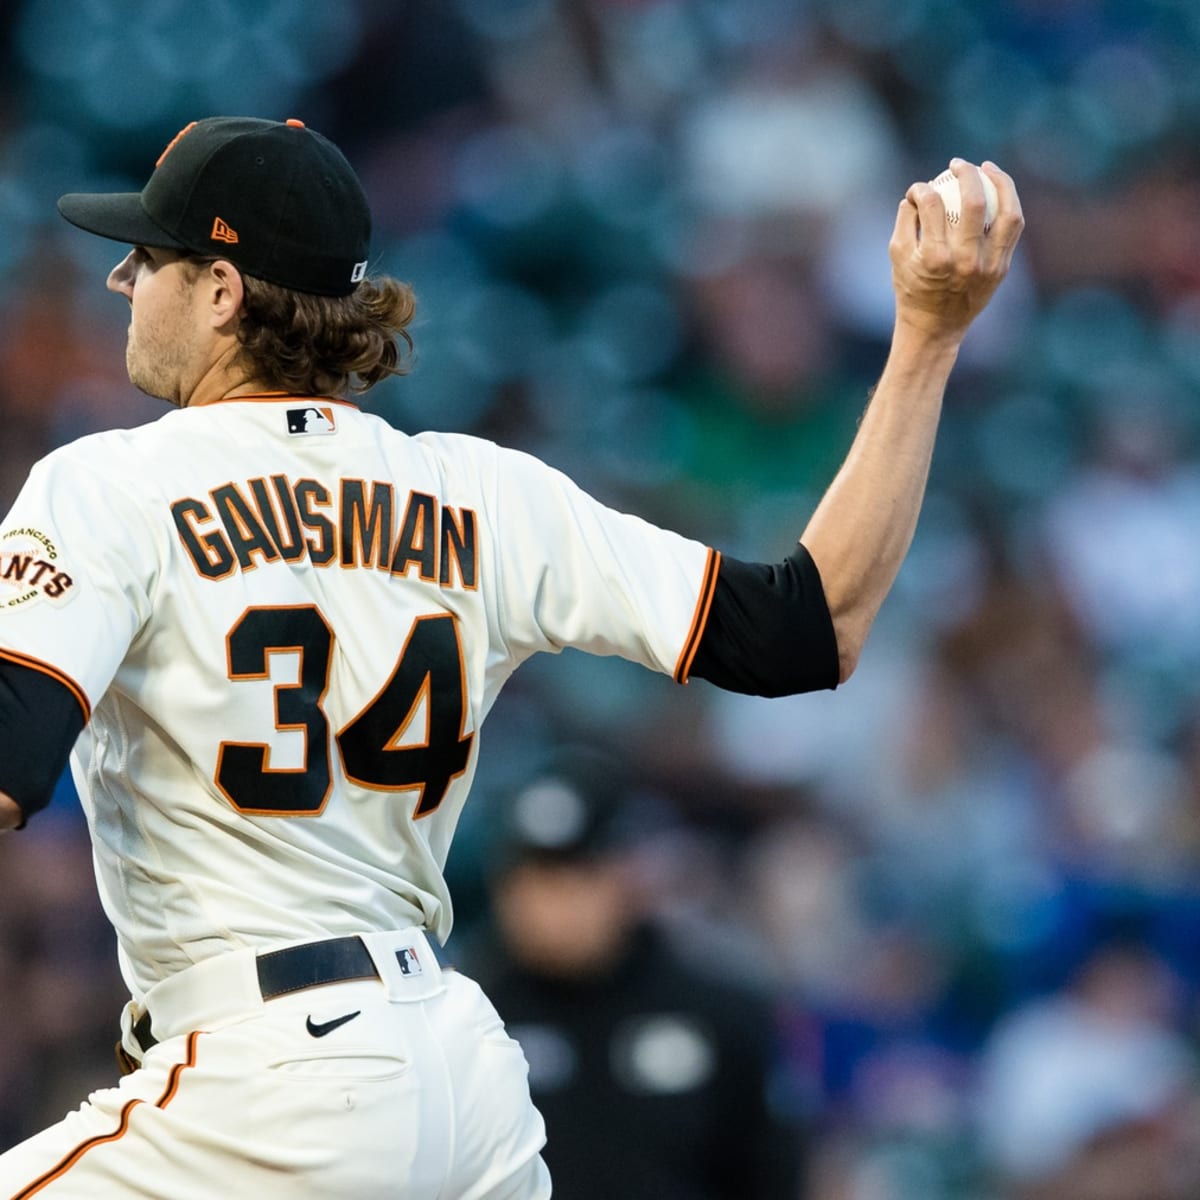 High-school hoops fight, splitter discovery and a cool head: The making of Kevin  Gausman, Giants ace – KNBR